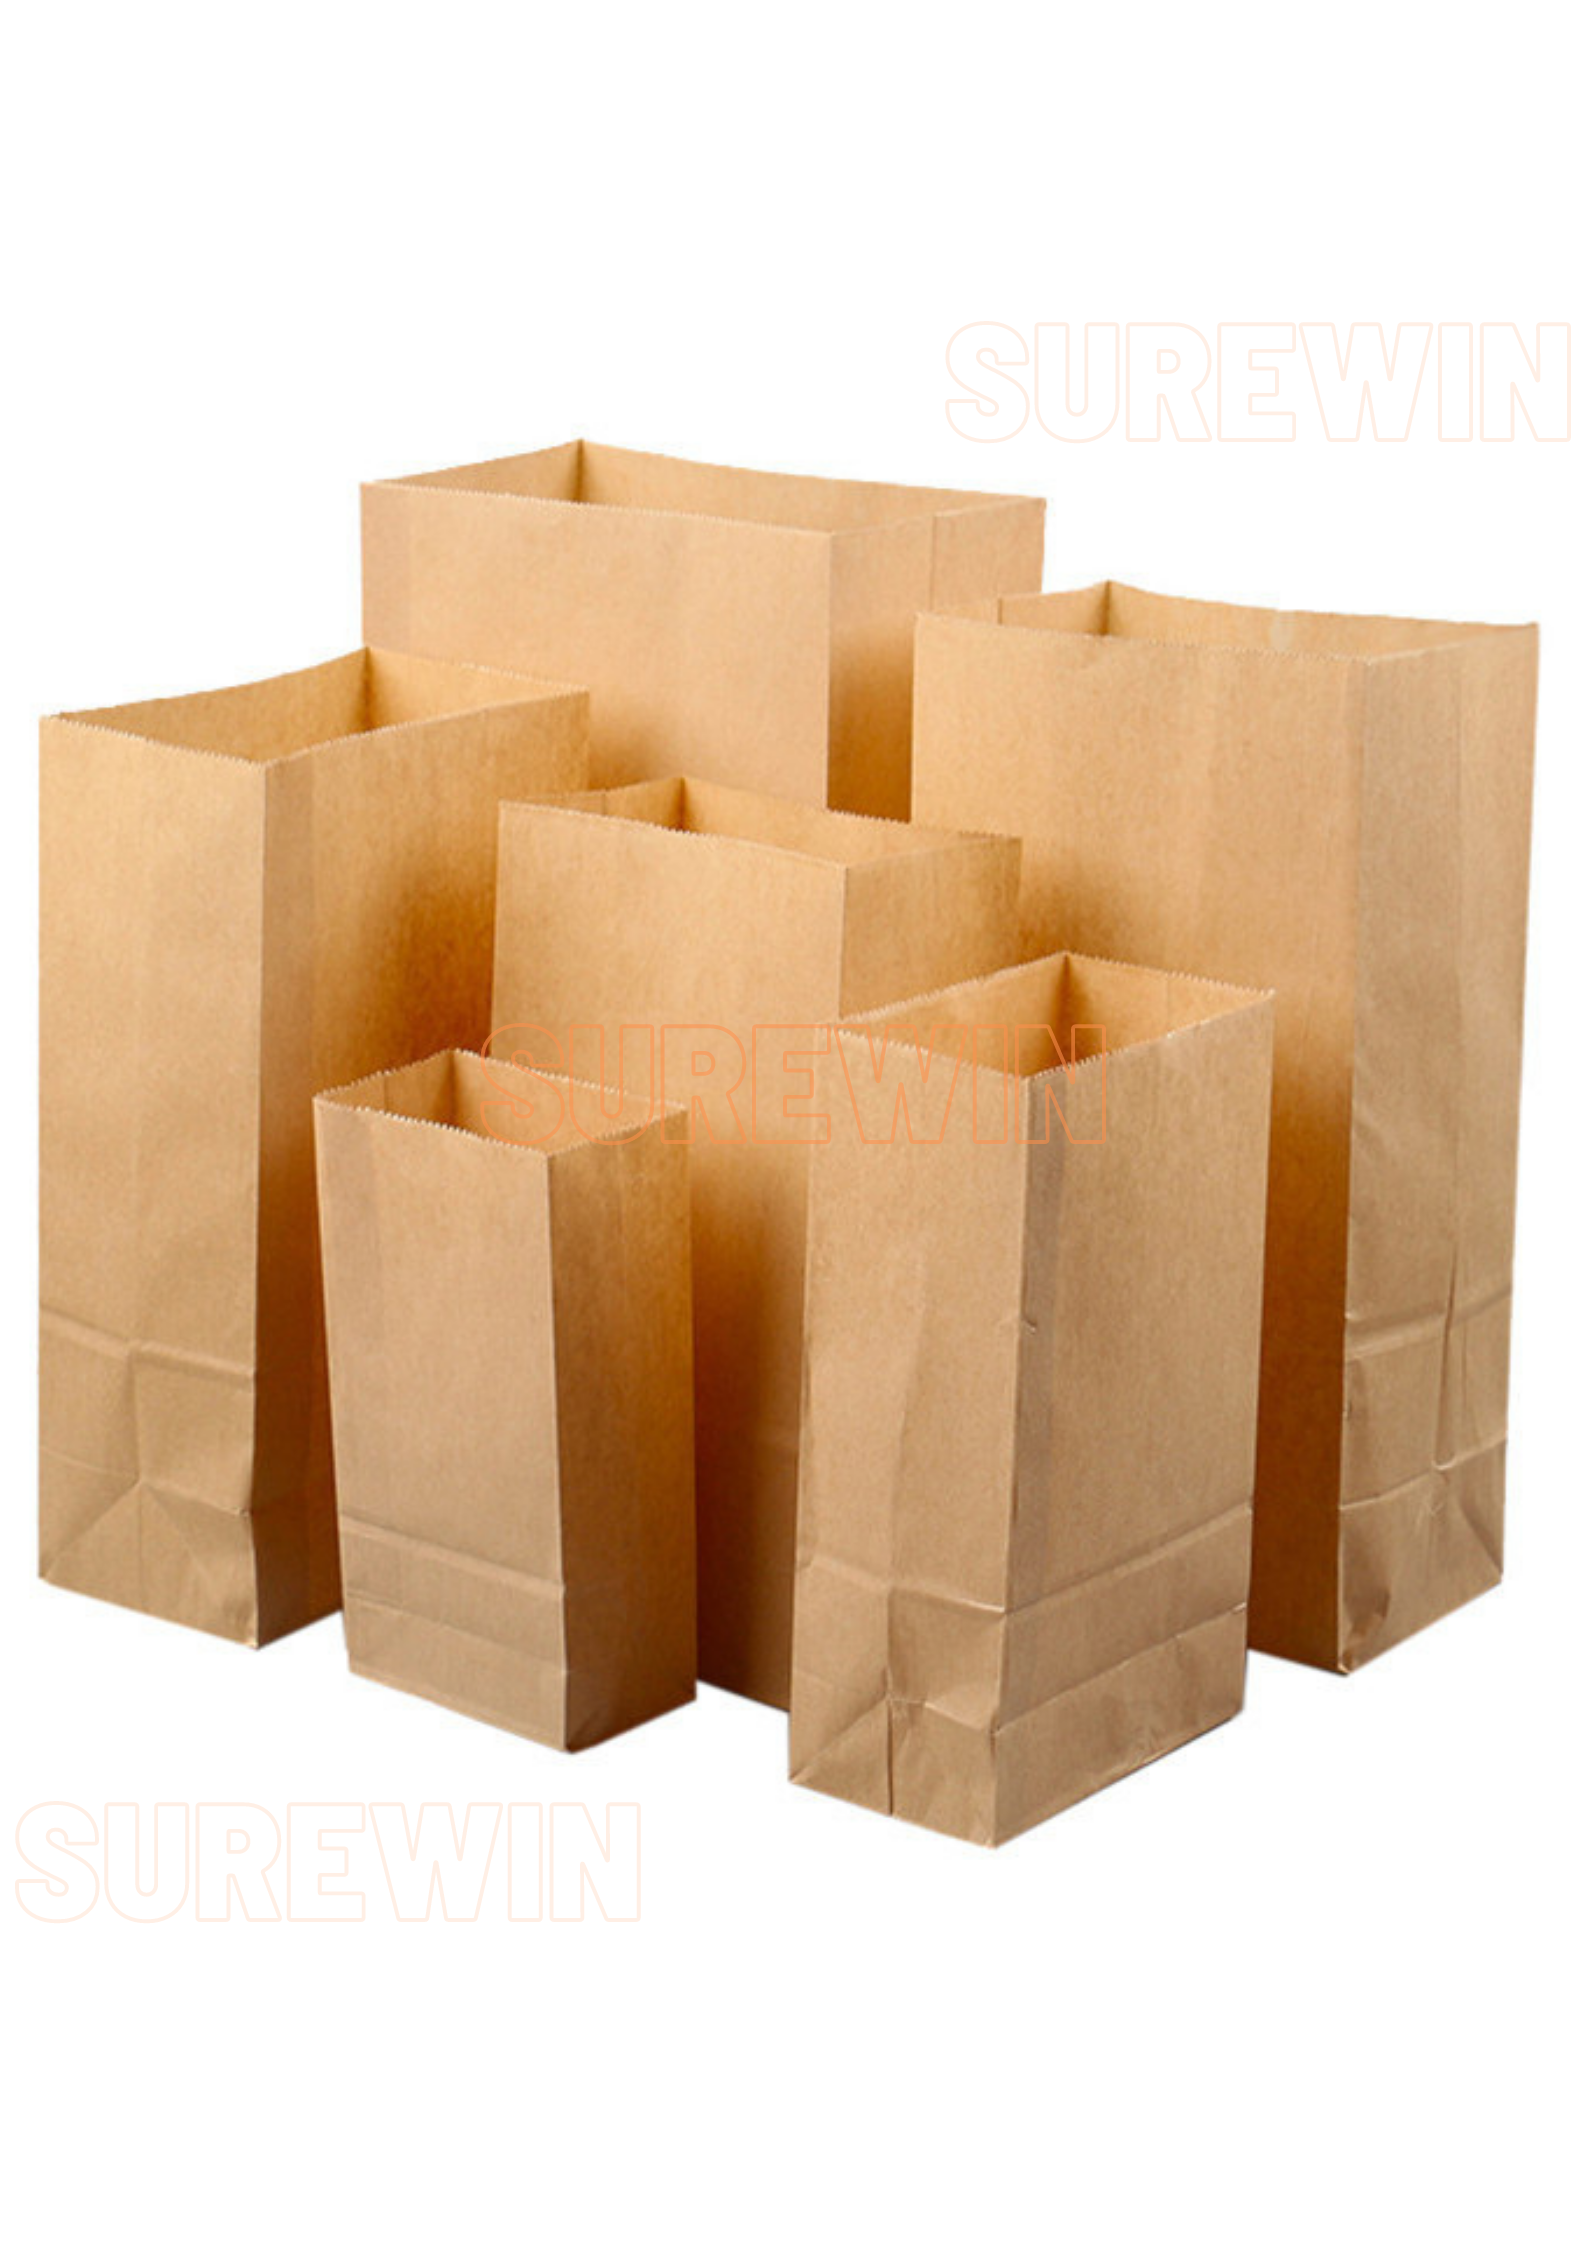 [50 Pack] Kraft Paper Bags with Handles 13 x 10 x 5 12 LB Twisted Rope  Retail Shopping Gift Durable Natural Brown Barrel Sack